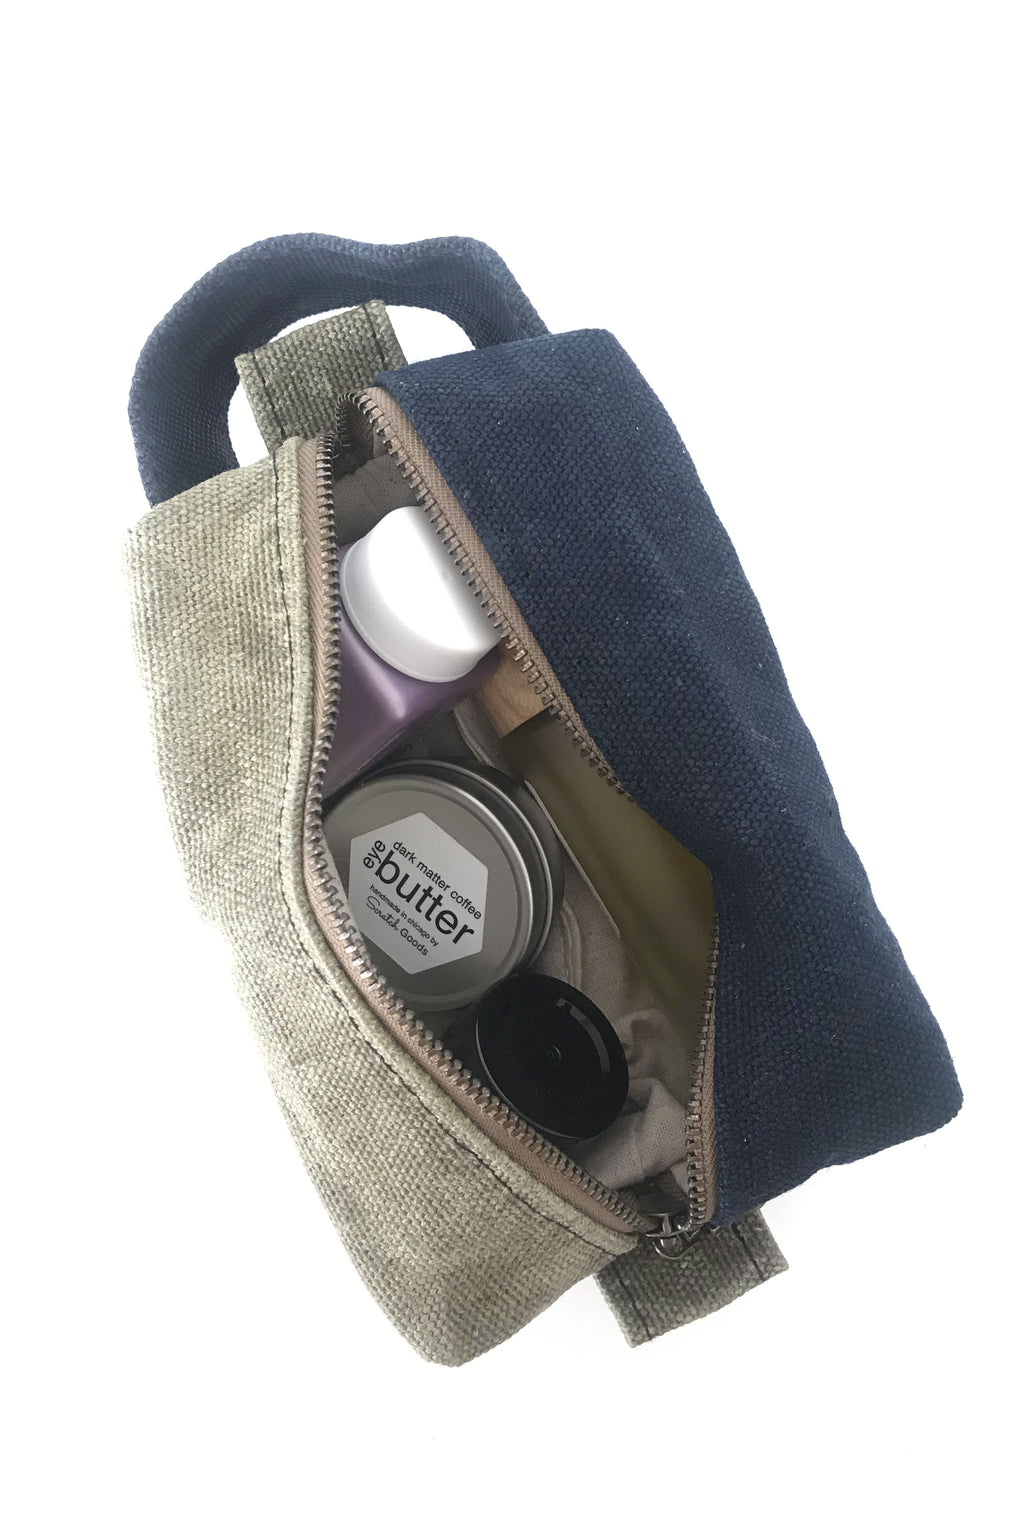 small waxed canvas toiletry bag with handle and brass zipper. The bag is open and contains small toiletries inside. The bag is half sage green and half dark navy blue. 